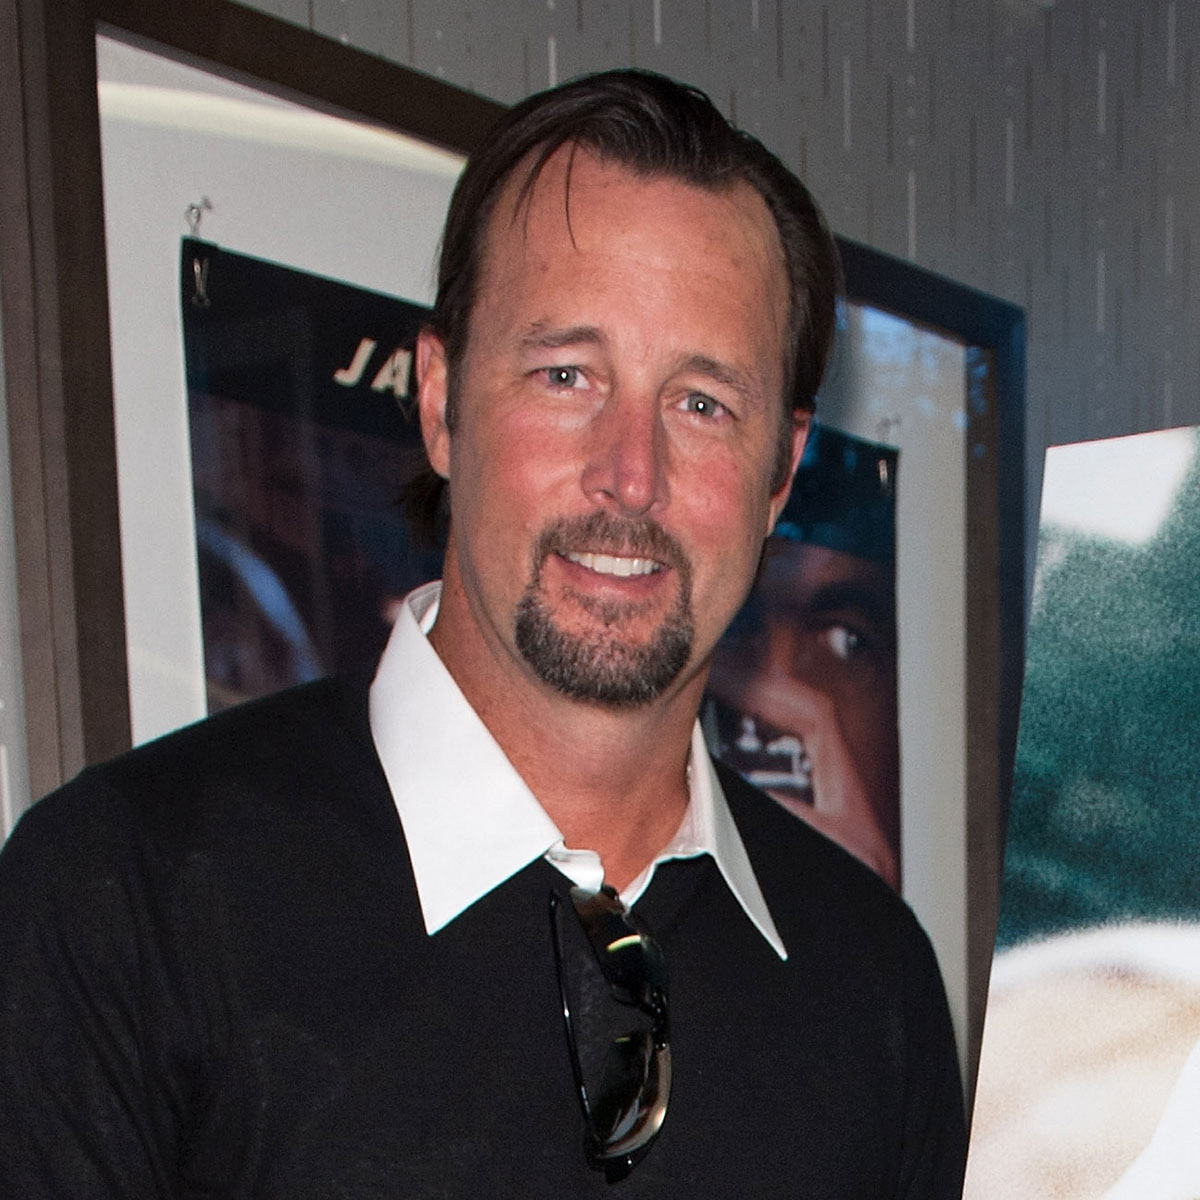 Tim Wakefield, former Pirate, has died at 57